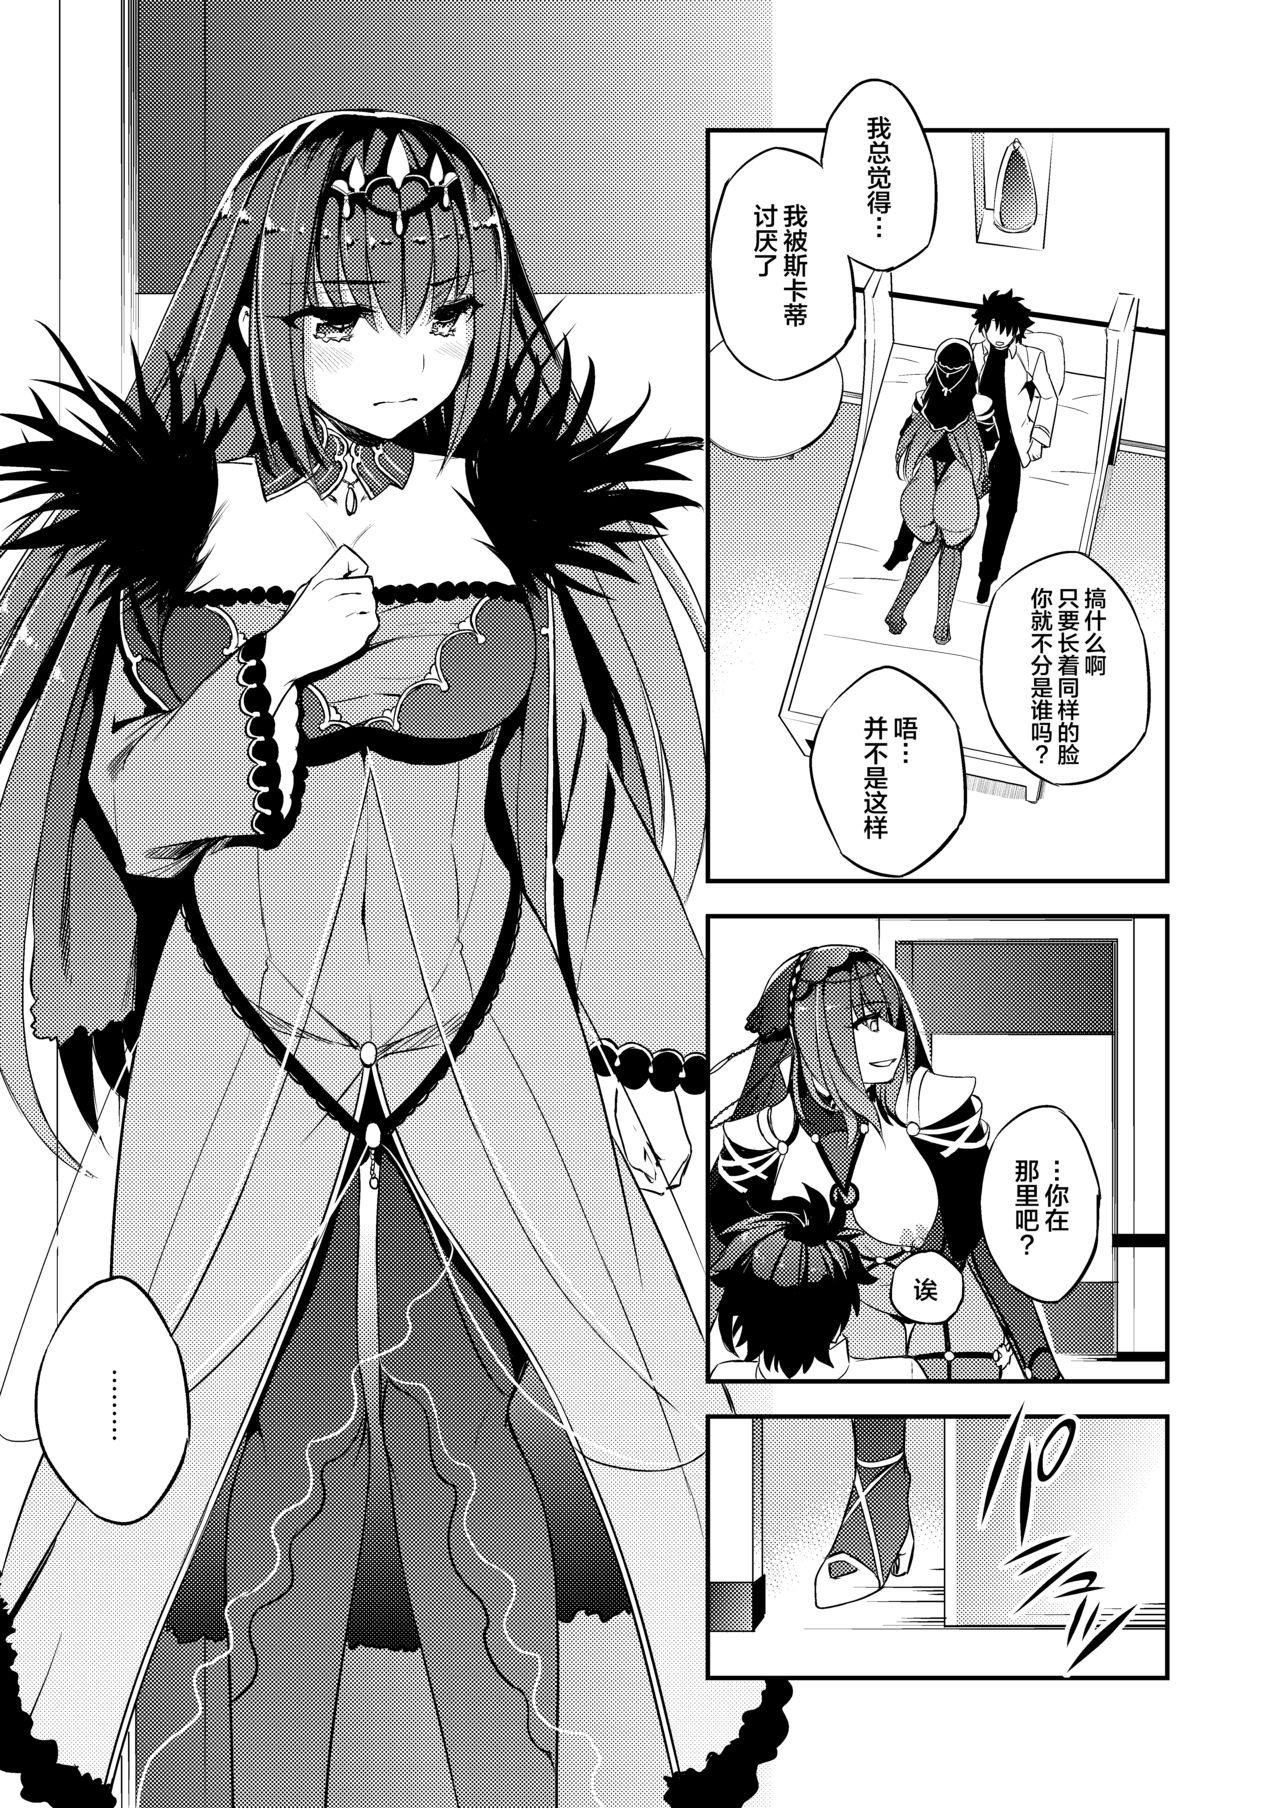 Nena C9-39 W Scathach to - Fate grand order Skirt - Page 5